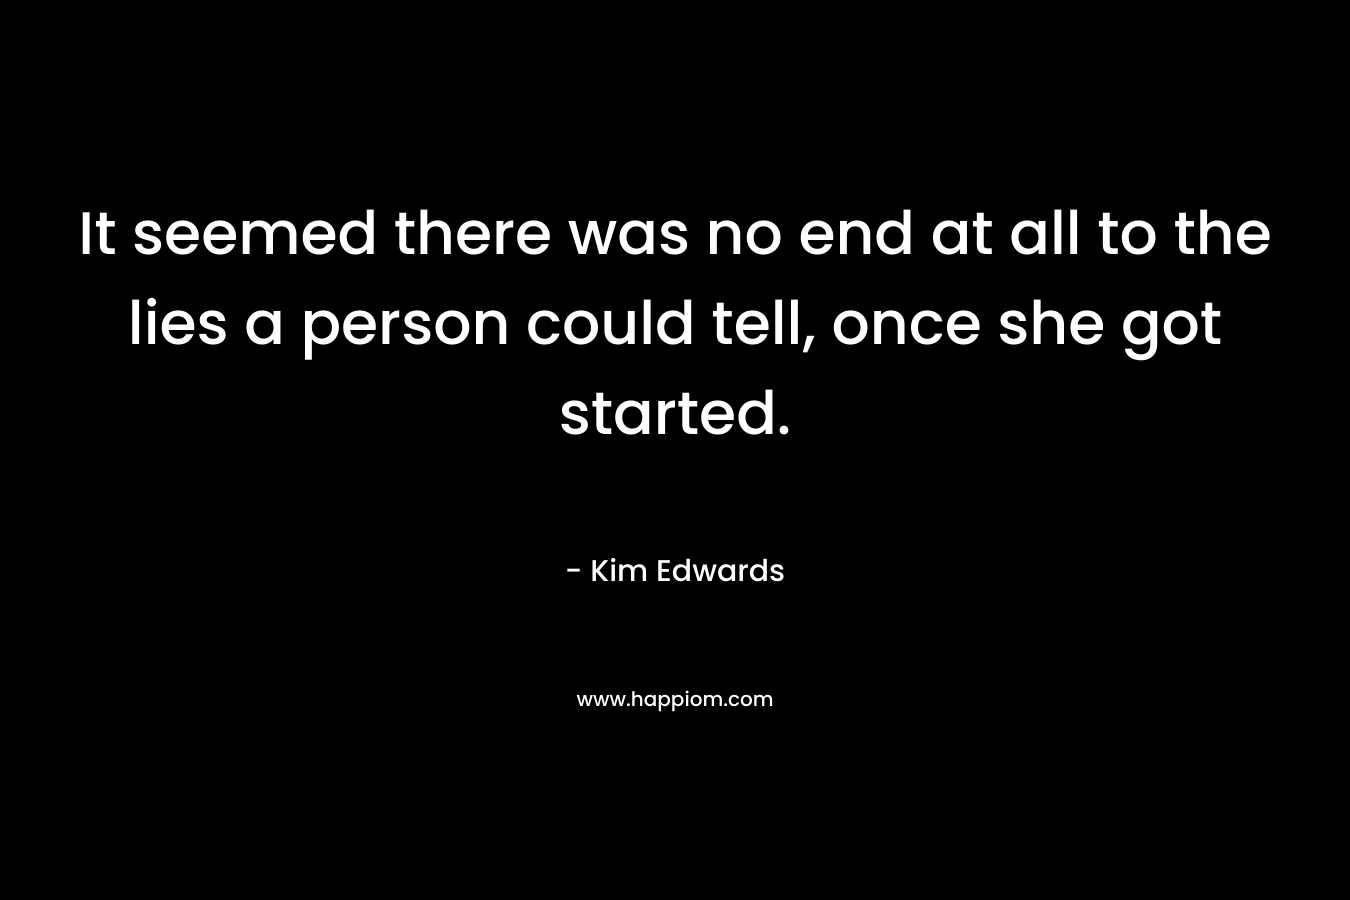 It seemed there was no end at all to the lies a person could tell, once she got started. – Kim Edwards